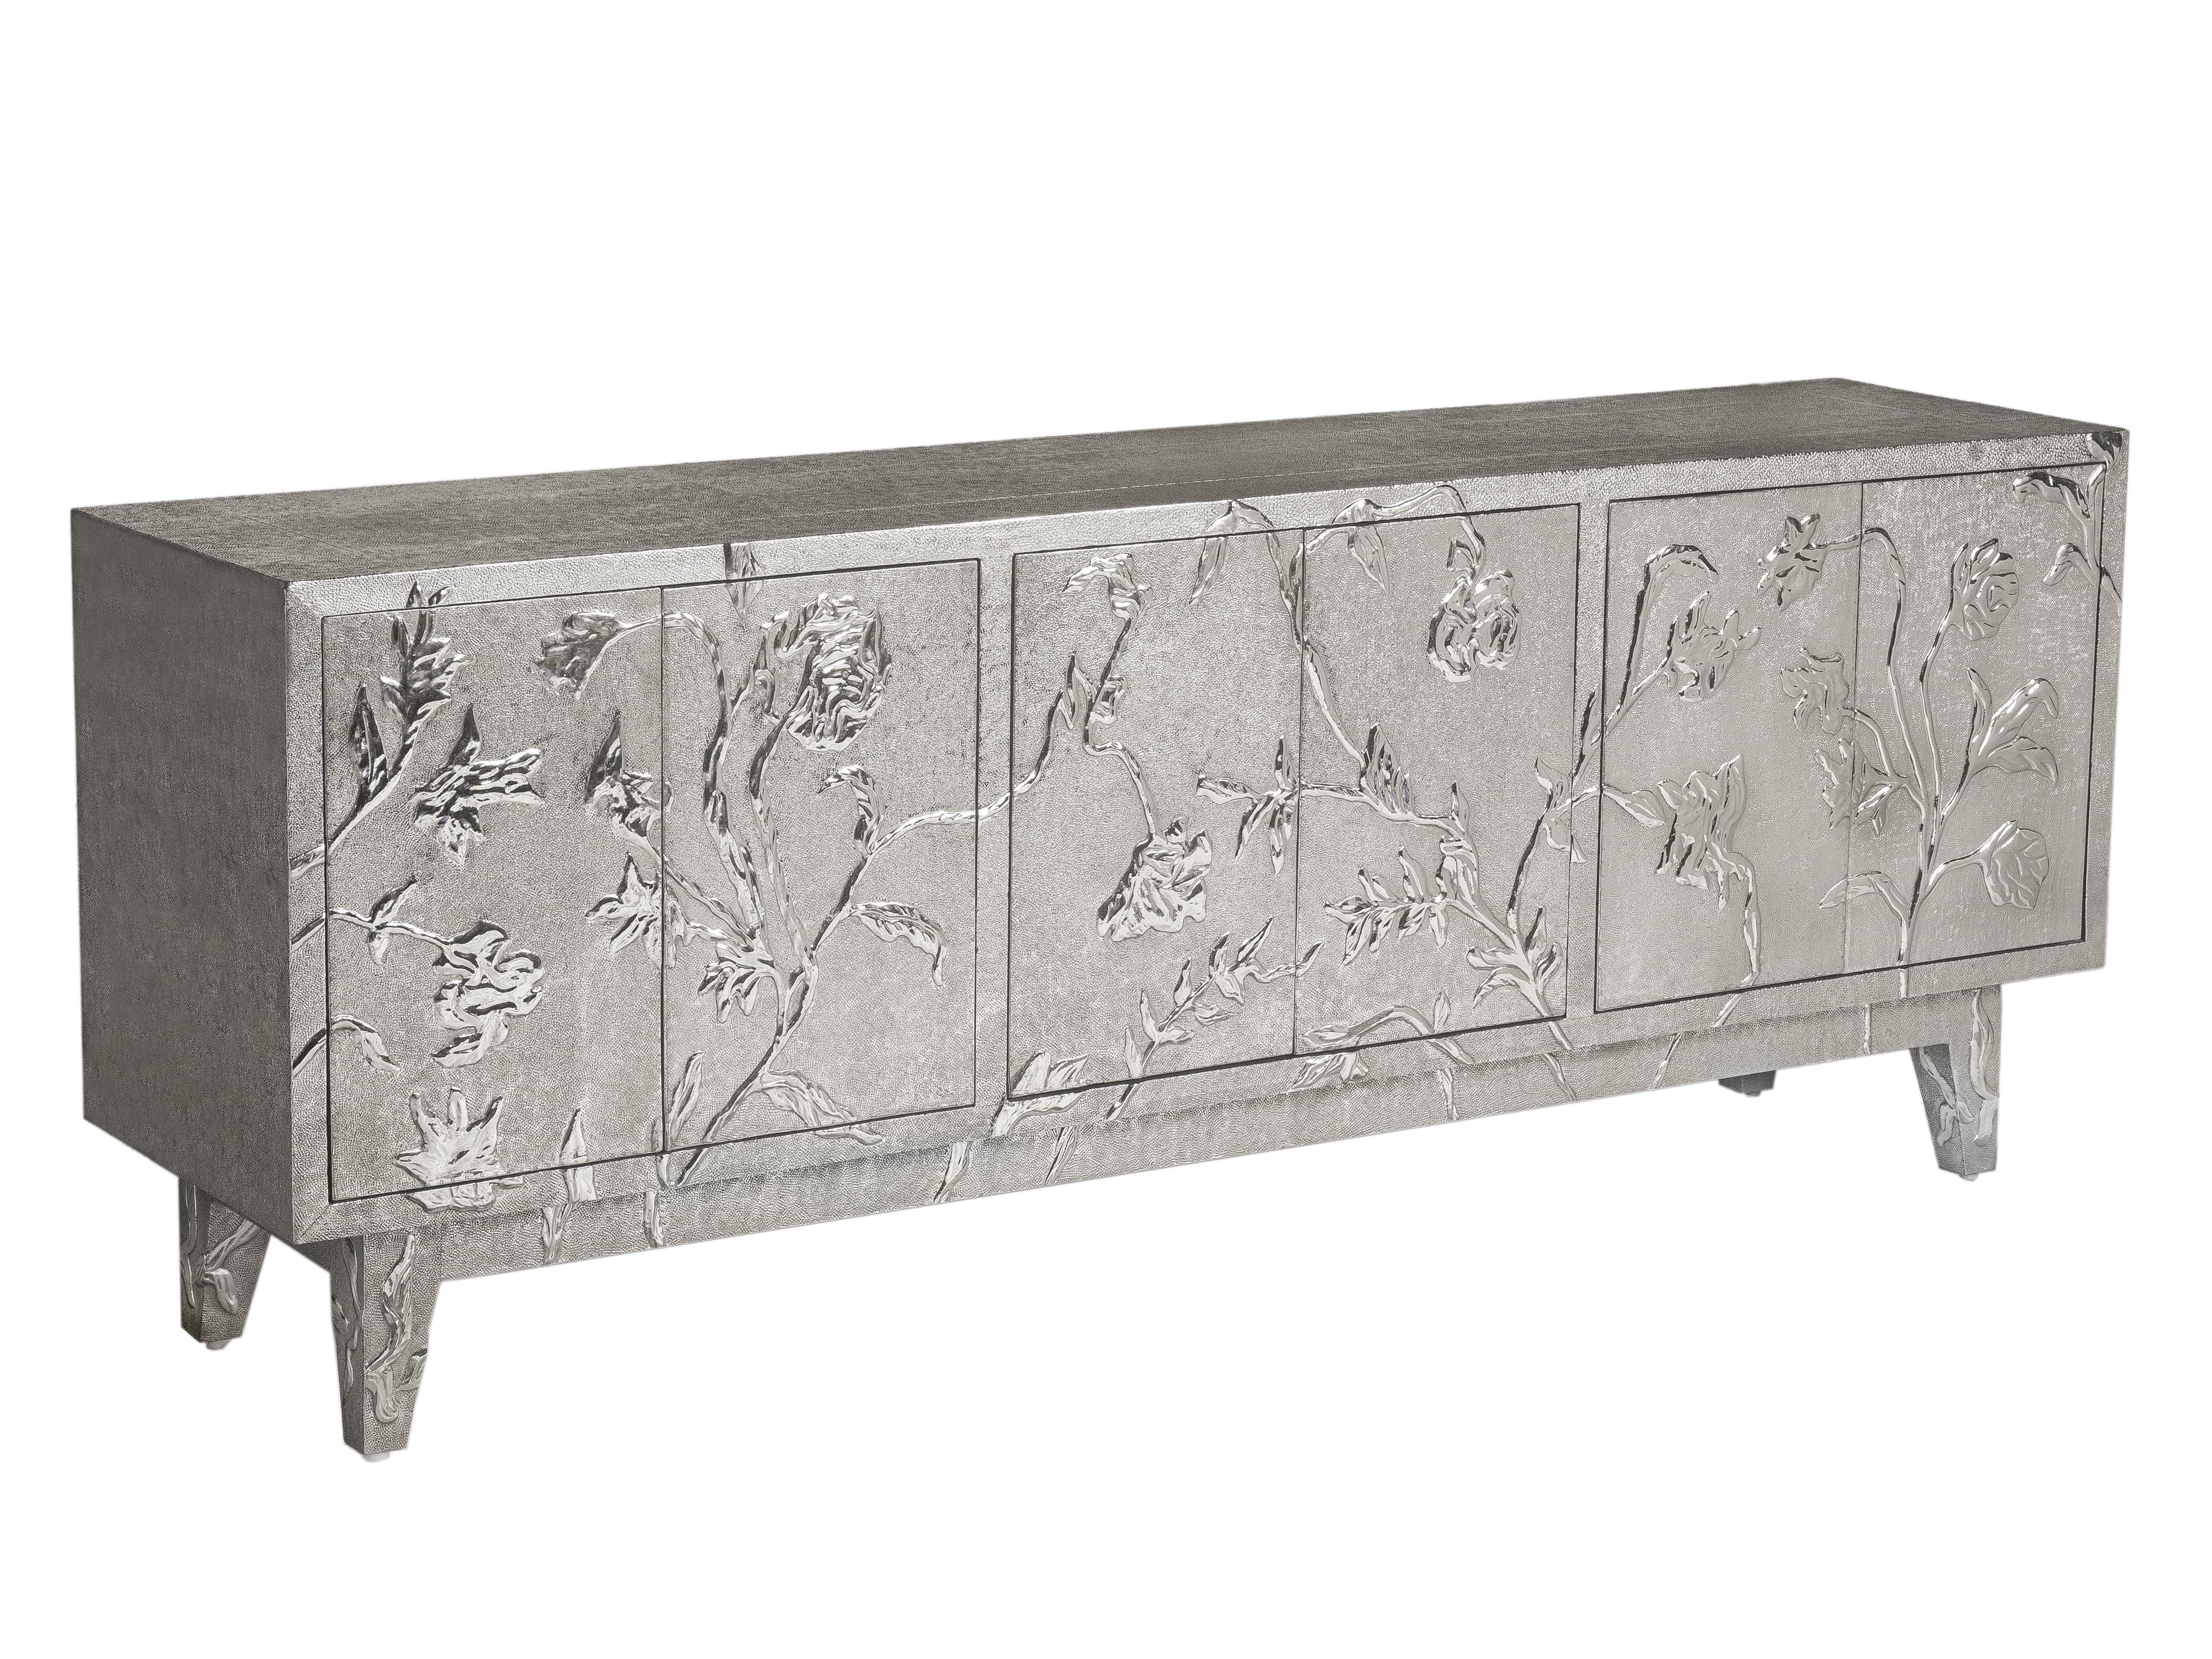 Hand-Carved Art Deco Dresser in Floral Design by Stephanie Odegard For Sale